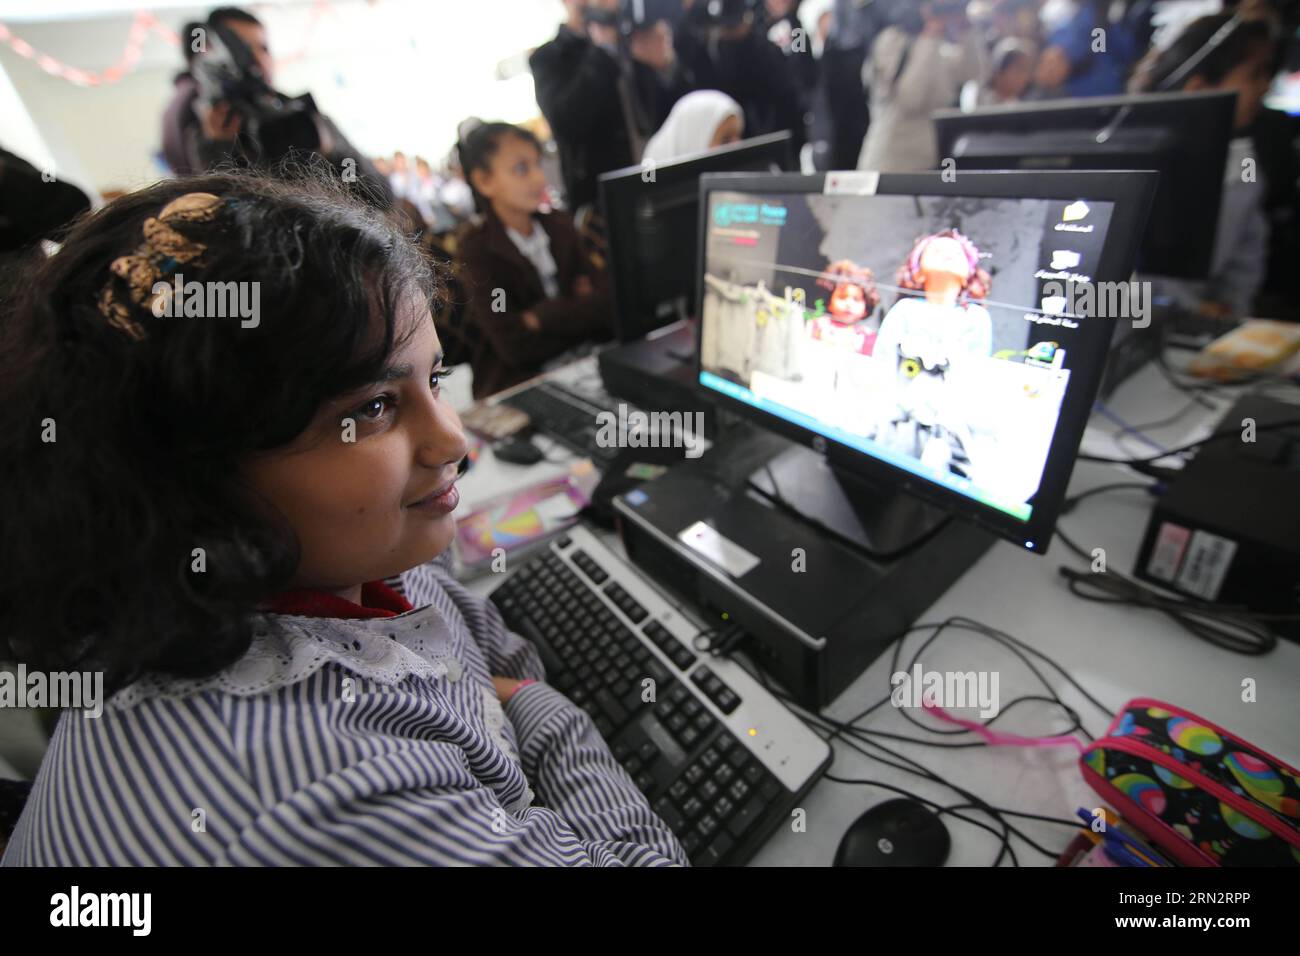 (150322) -- GAZA, March 22, 2015 -- A Palestinian student attends a lesson in a computer laboratory at a UN-run school which is reopened after it was damaged during the war between Israel and Hamas militants in Khuzaa village of the southern Gaza Strip city of Khan Yunis, on March 22, 2015. ) MIDEAST-GAZA-REOPEN-SCHOOL KhaledxOmar PUBLICATIONxNOTxINxCHN   Gaza March 22 2015 a PALESTINIAN Student Attends a Lesson in a Computer Laboratory AT a UN Run School Which IS reopened After IT what damaged during The was between Israel and Hamas militant in  Village of The Southern Gaza Strip City of Khan Stock Photo